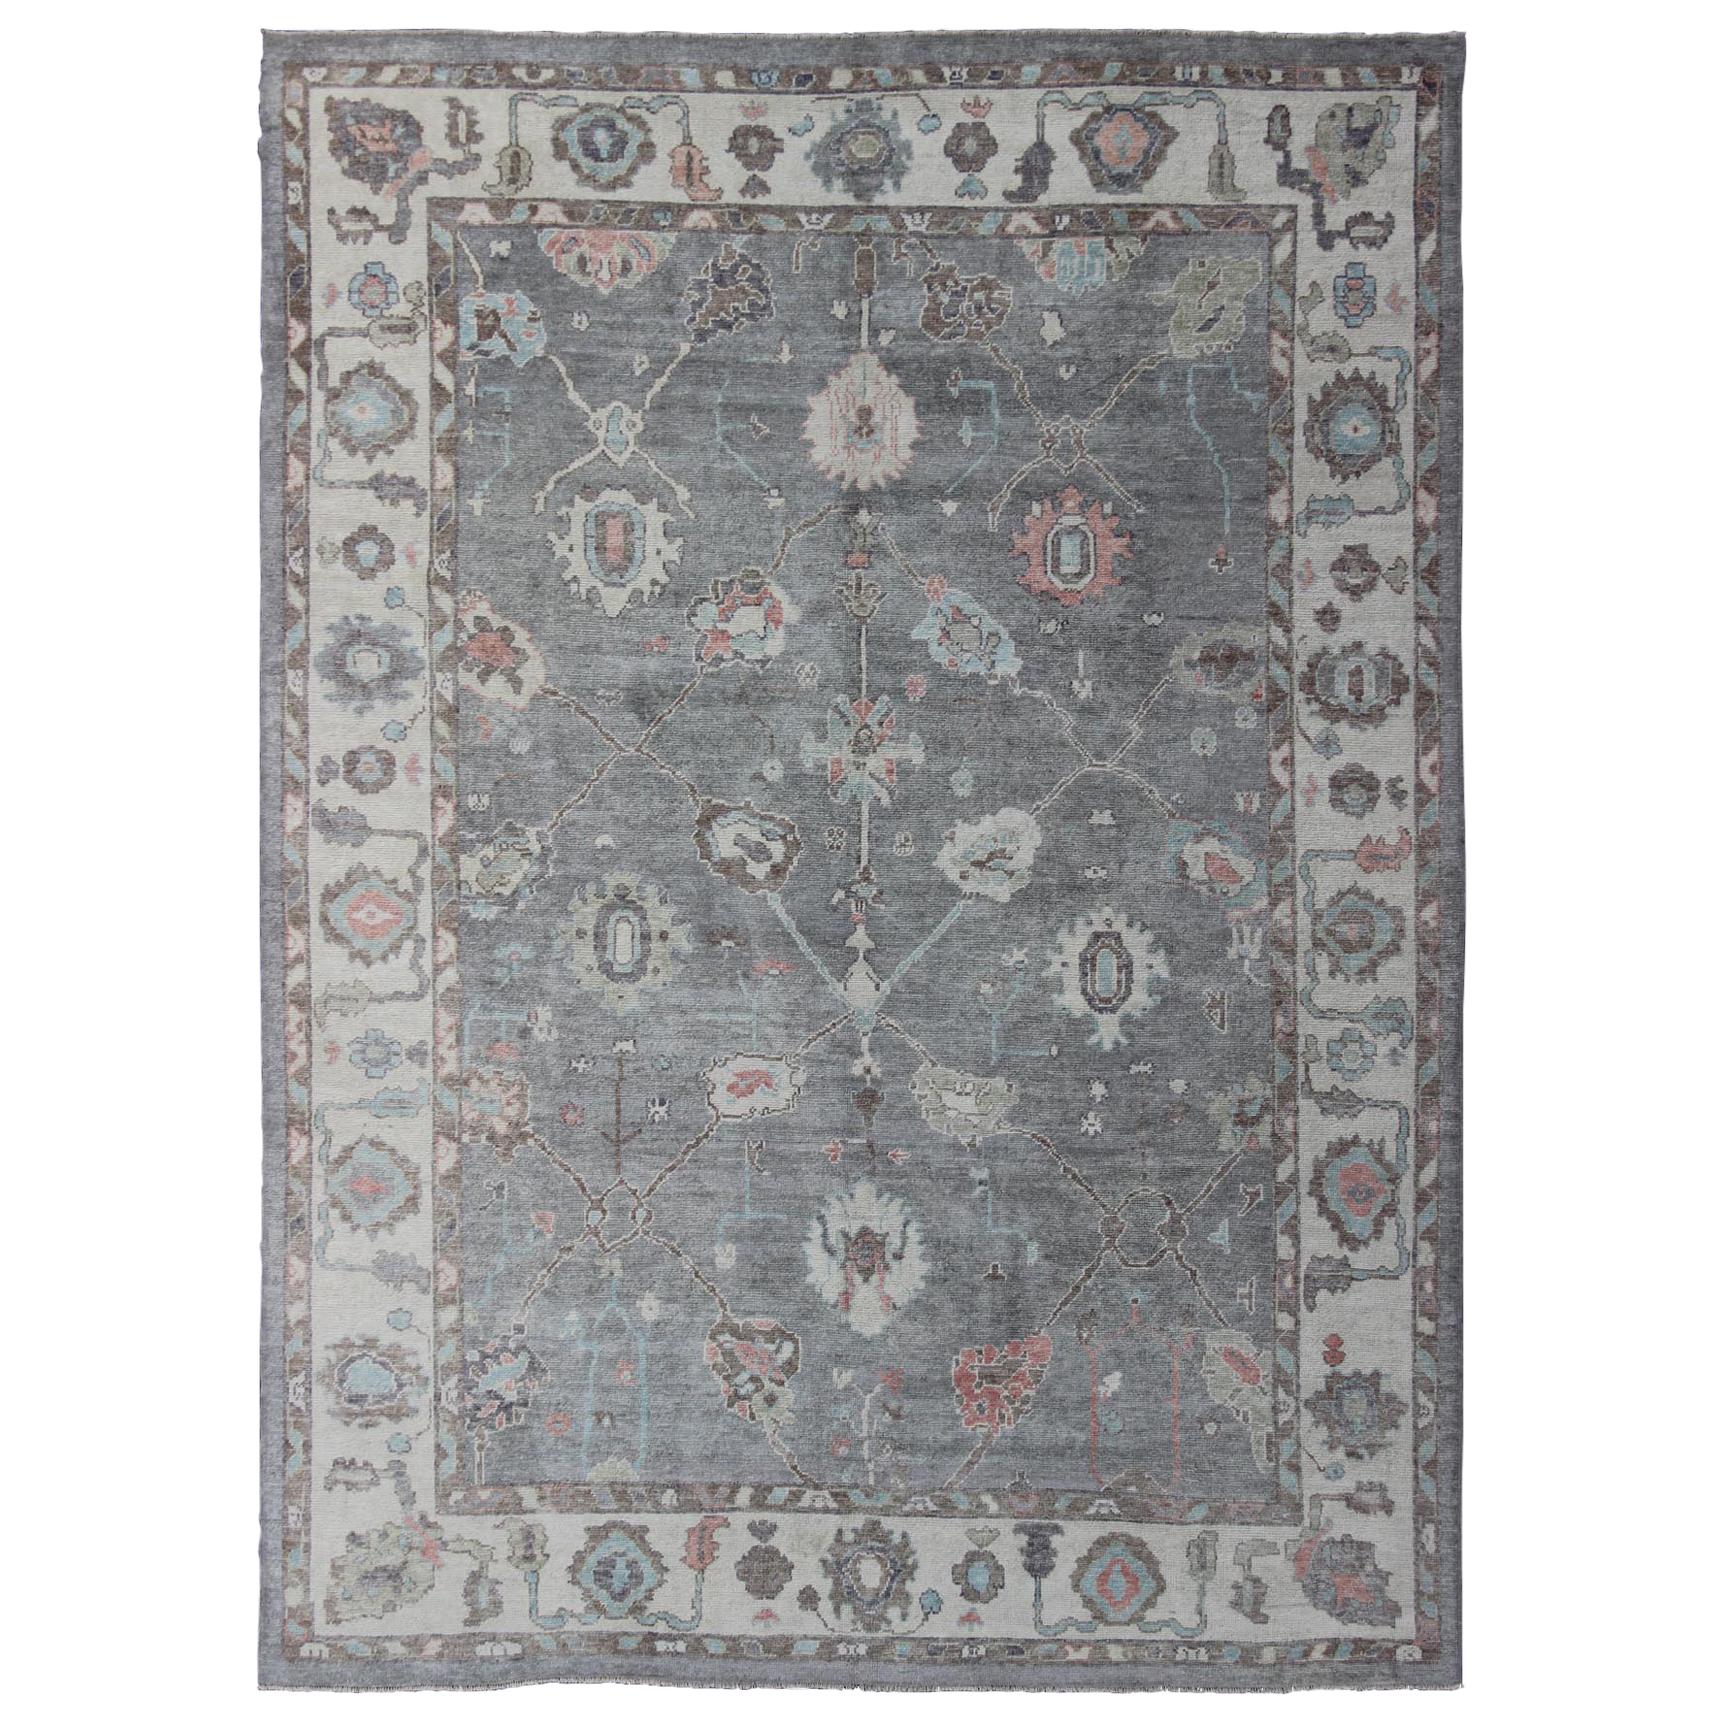 Large Turkish Modern Oushak Rug in Gray, Pink, Neutrals and All-Over Design